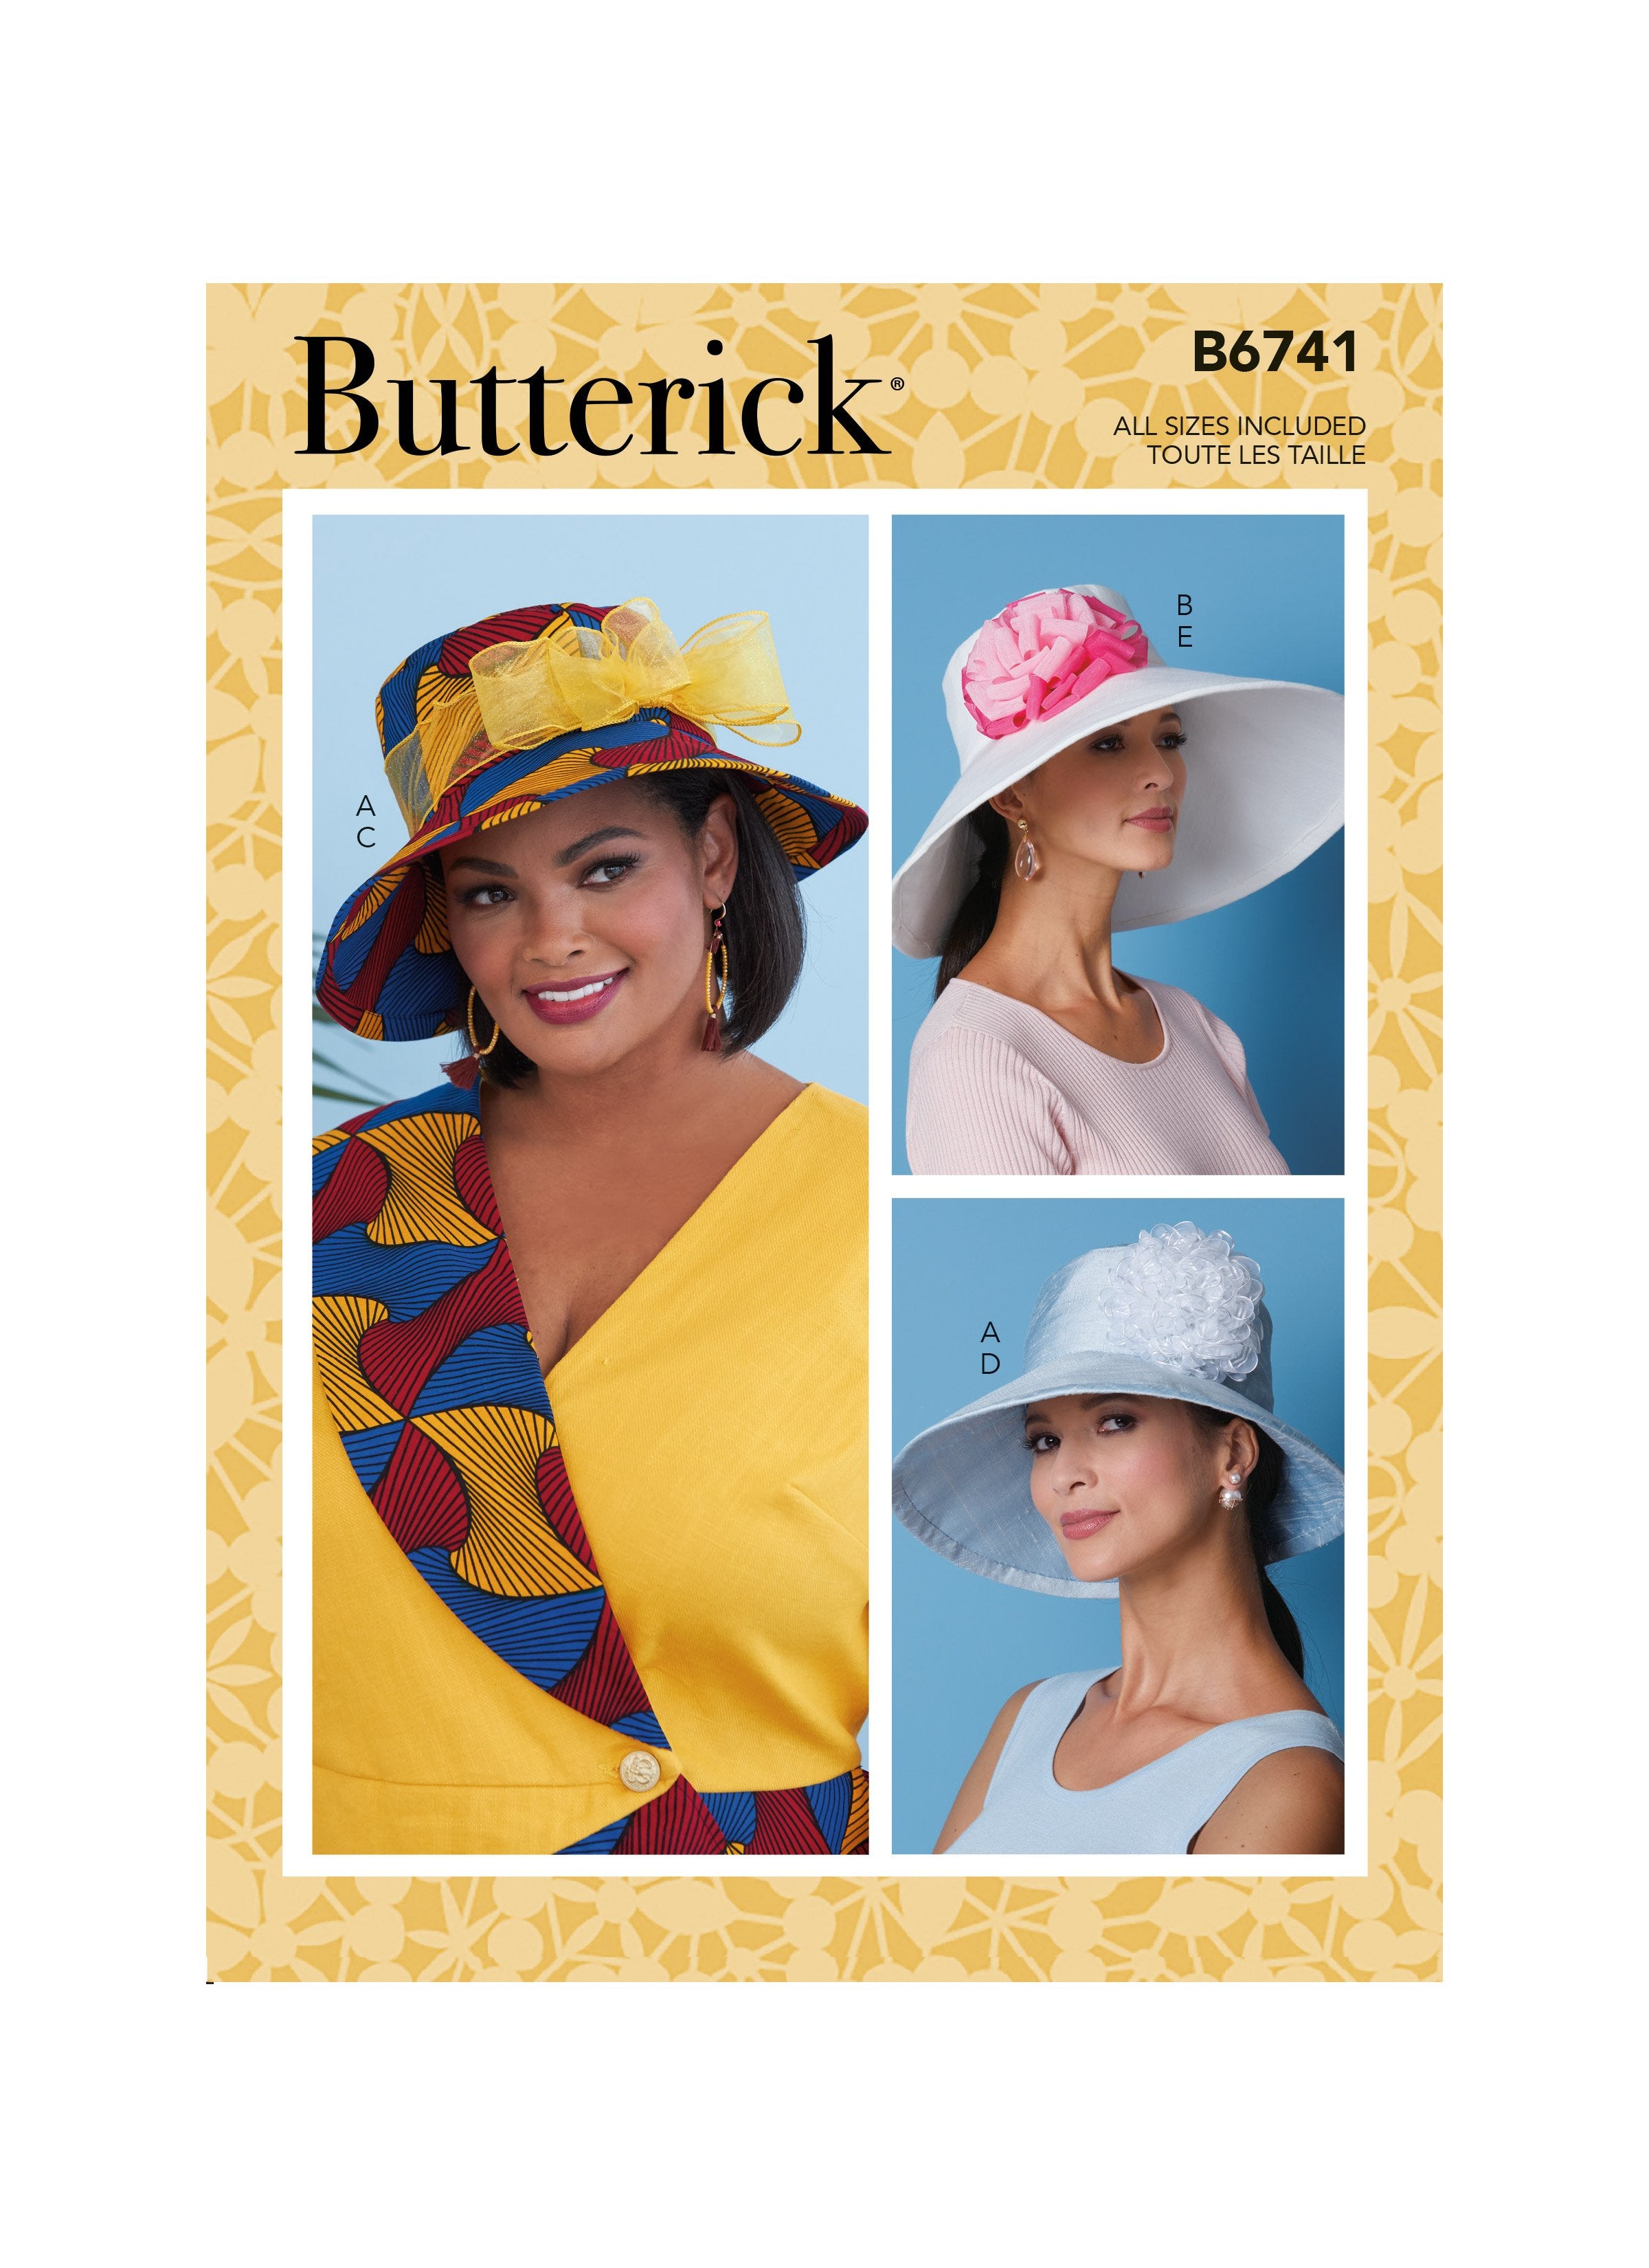 Butterick Sewing Pattern 6741 Hats With Ribbon, Flowers and Bow from Jaycotts Sewing Supplies